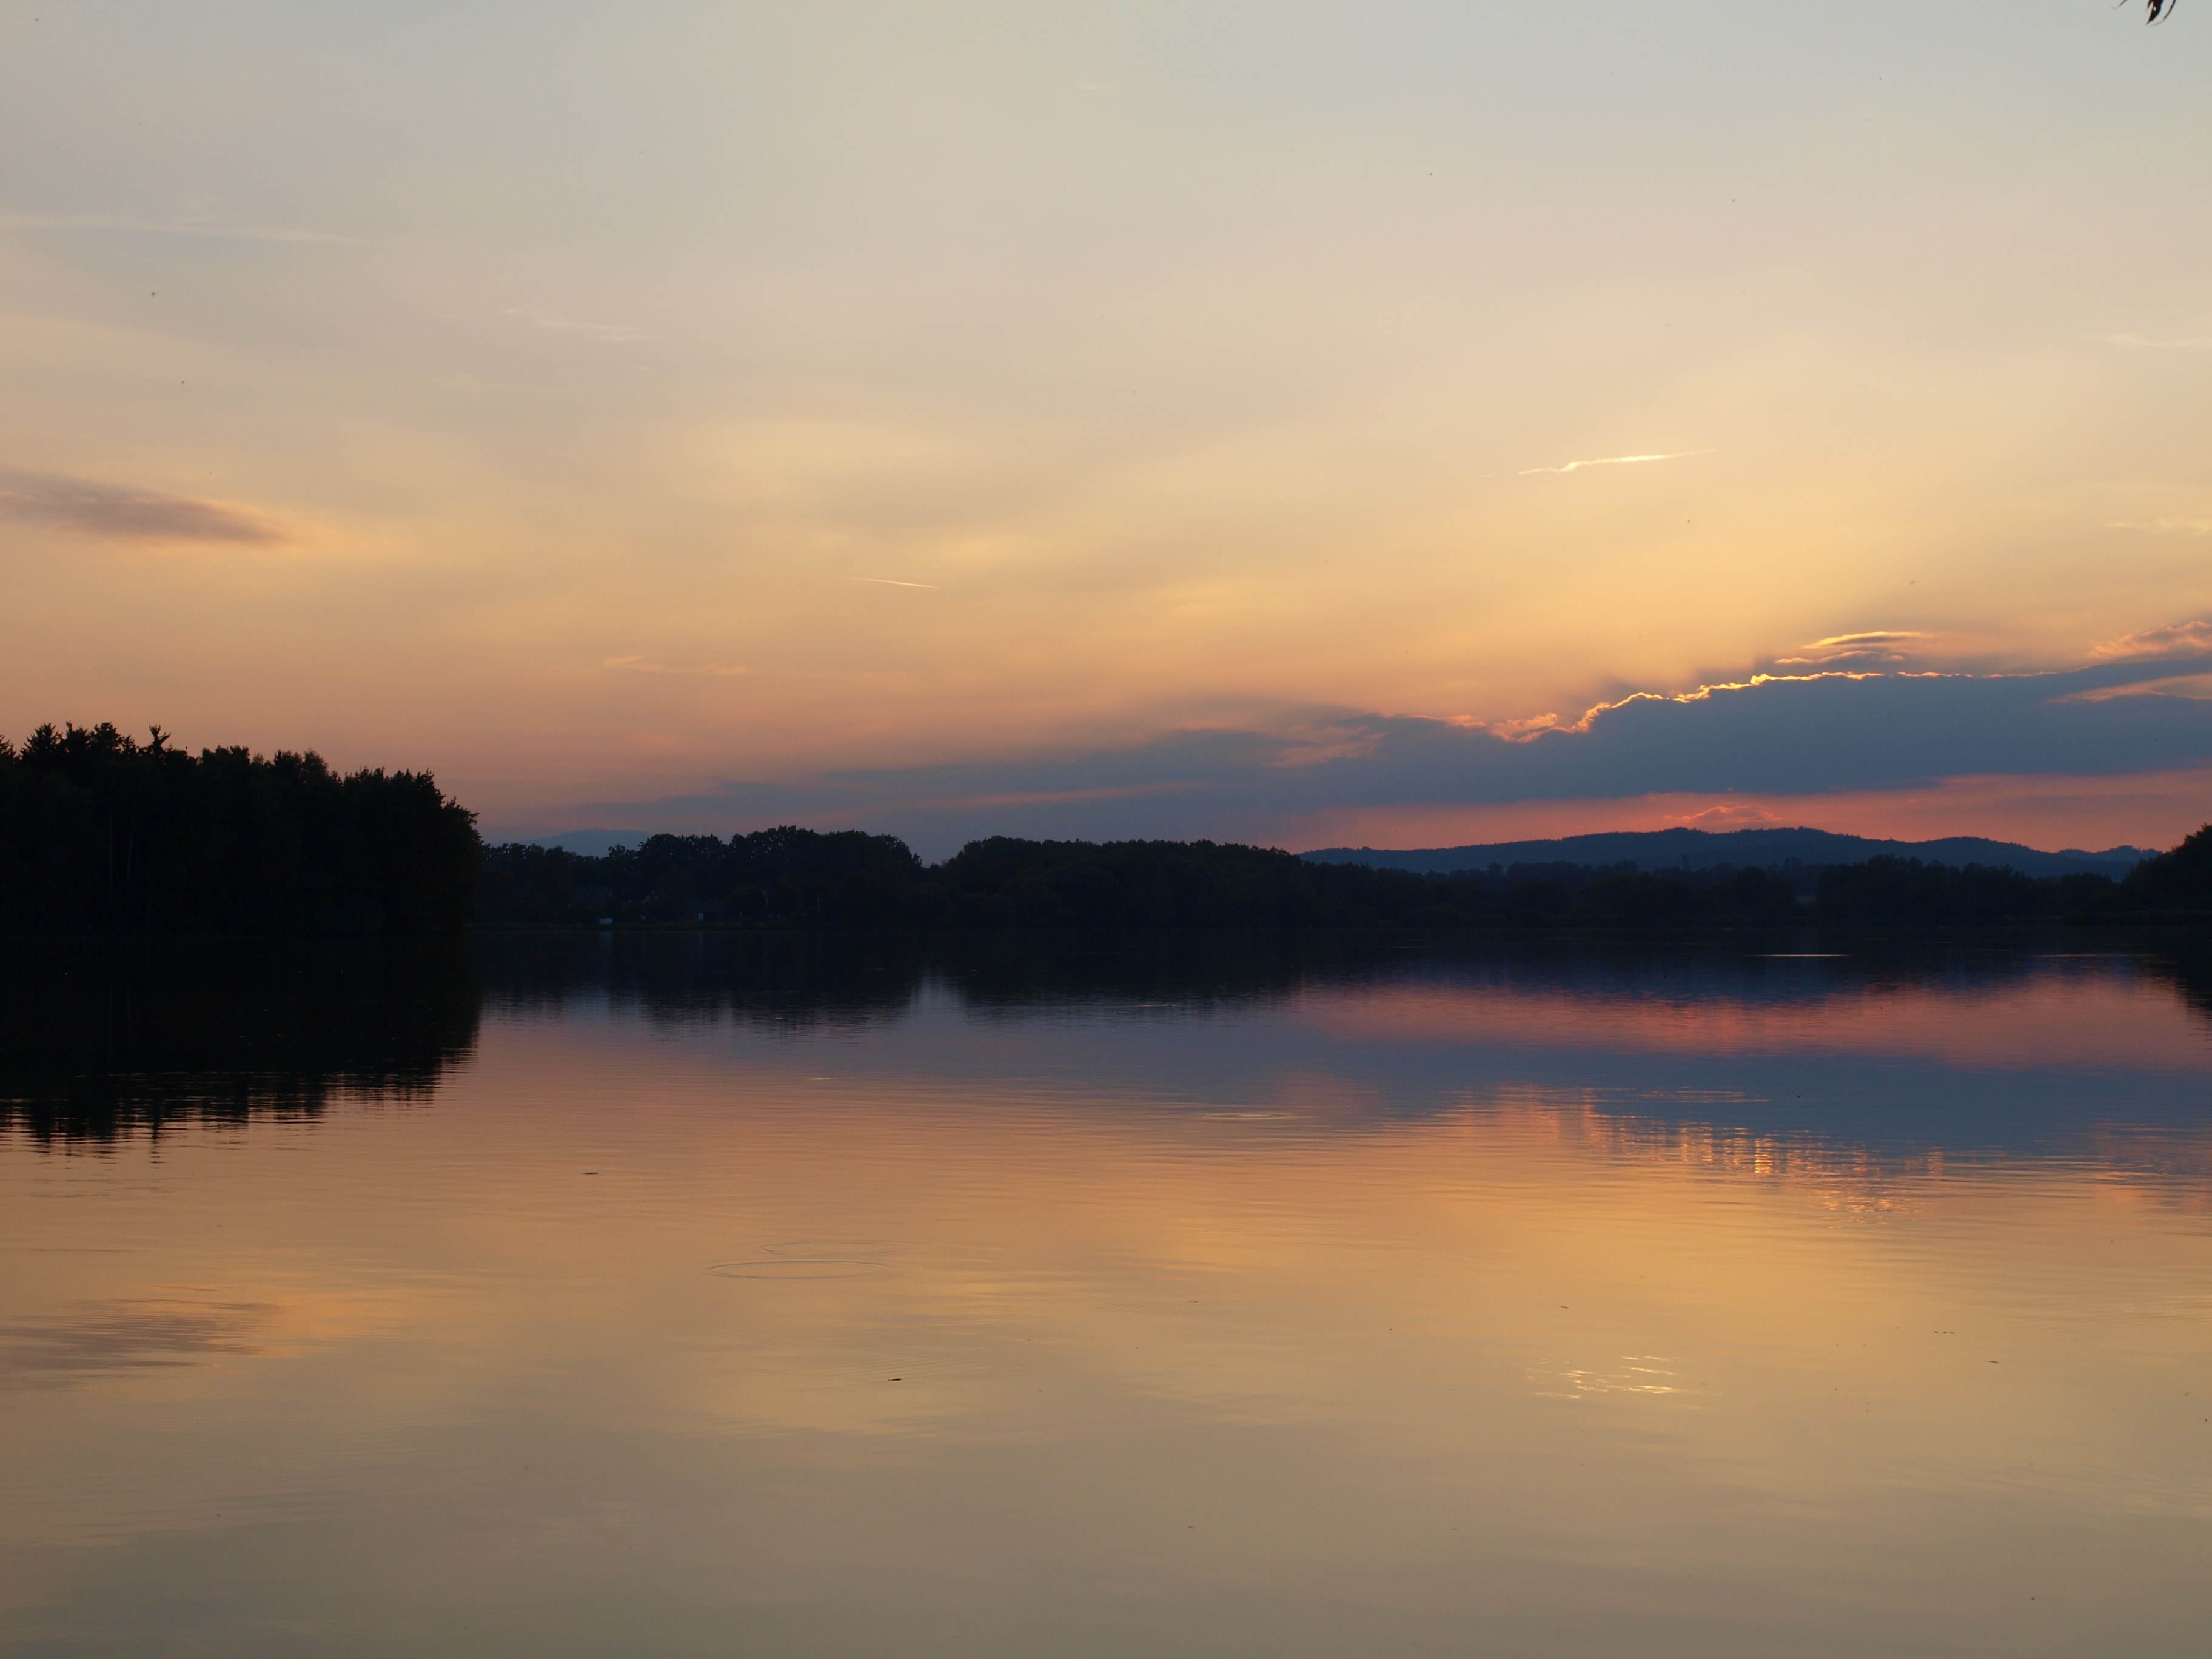 panoramic photo of land formation silhouette and body of water at daybreak